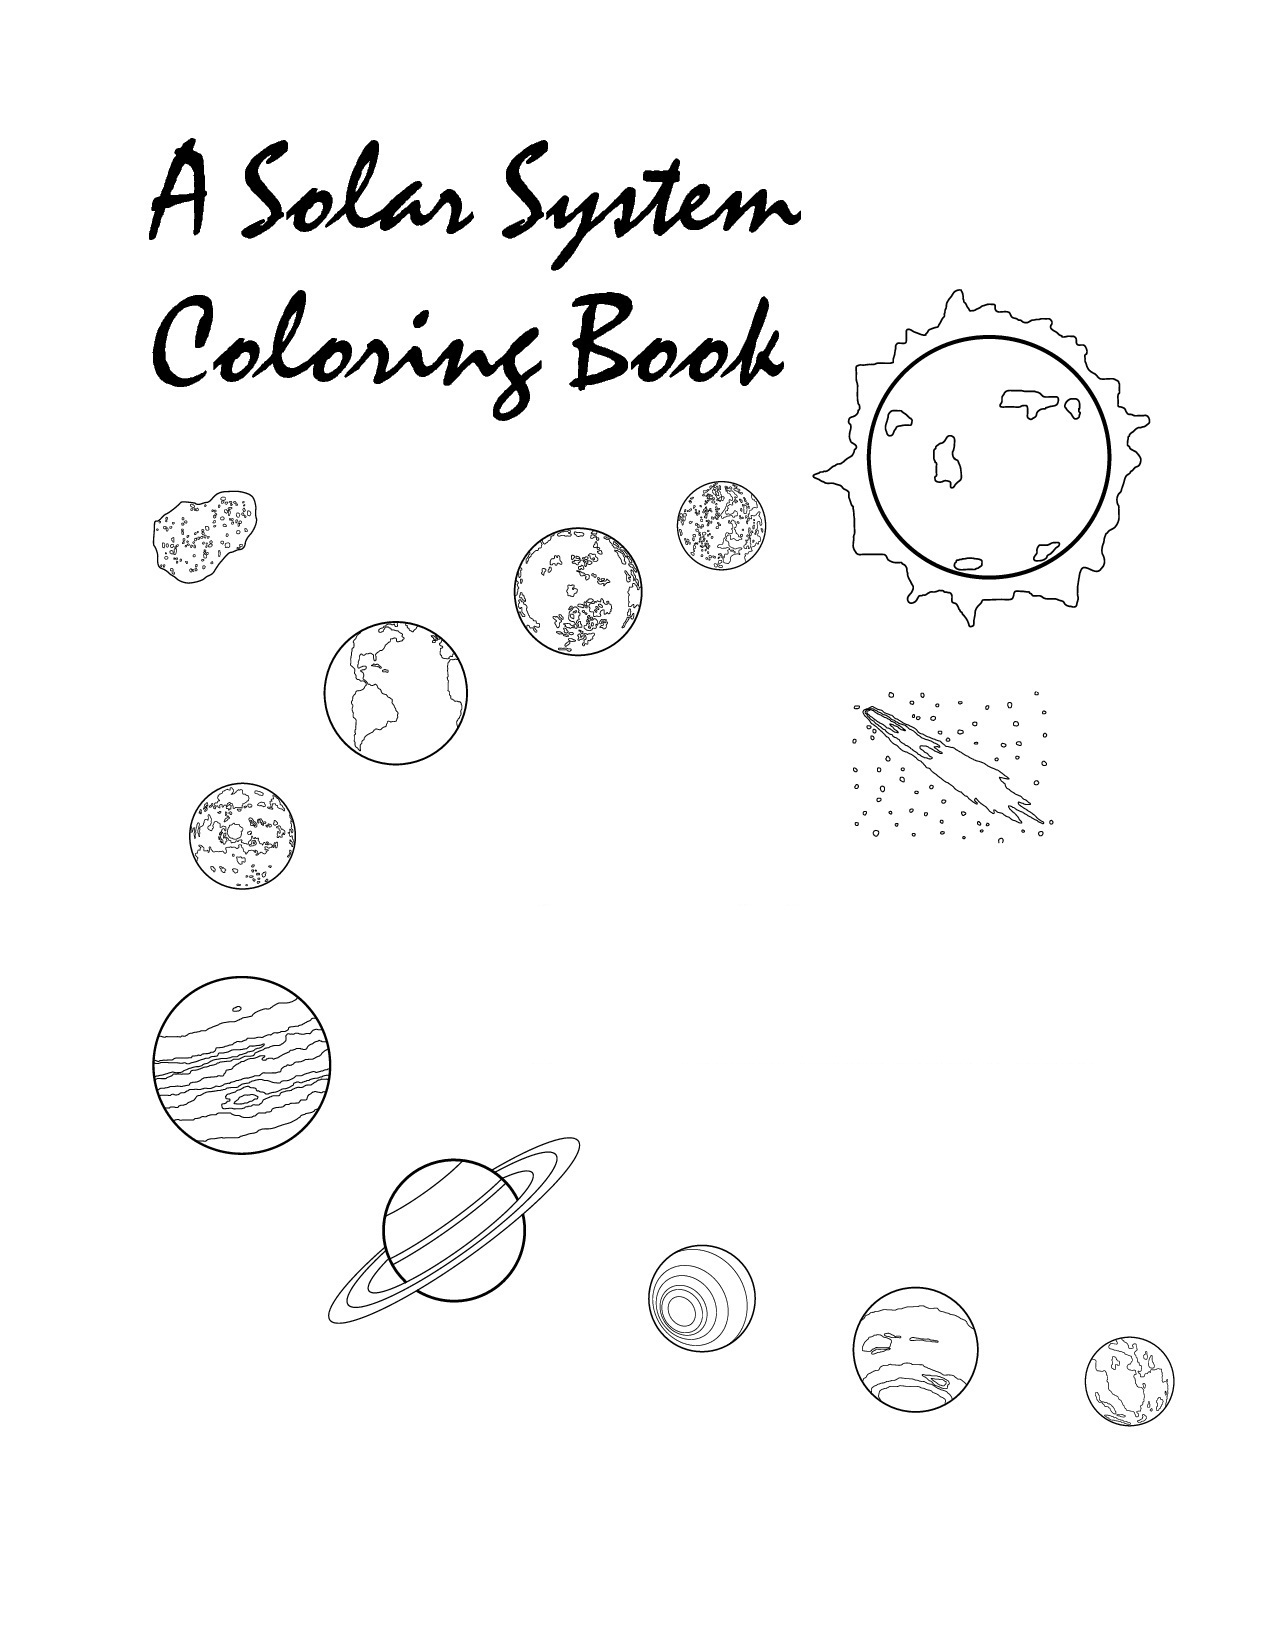 Solar system coloring pages to download and print for free